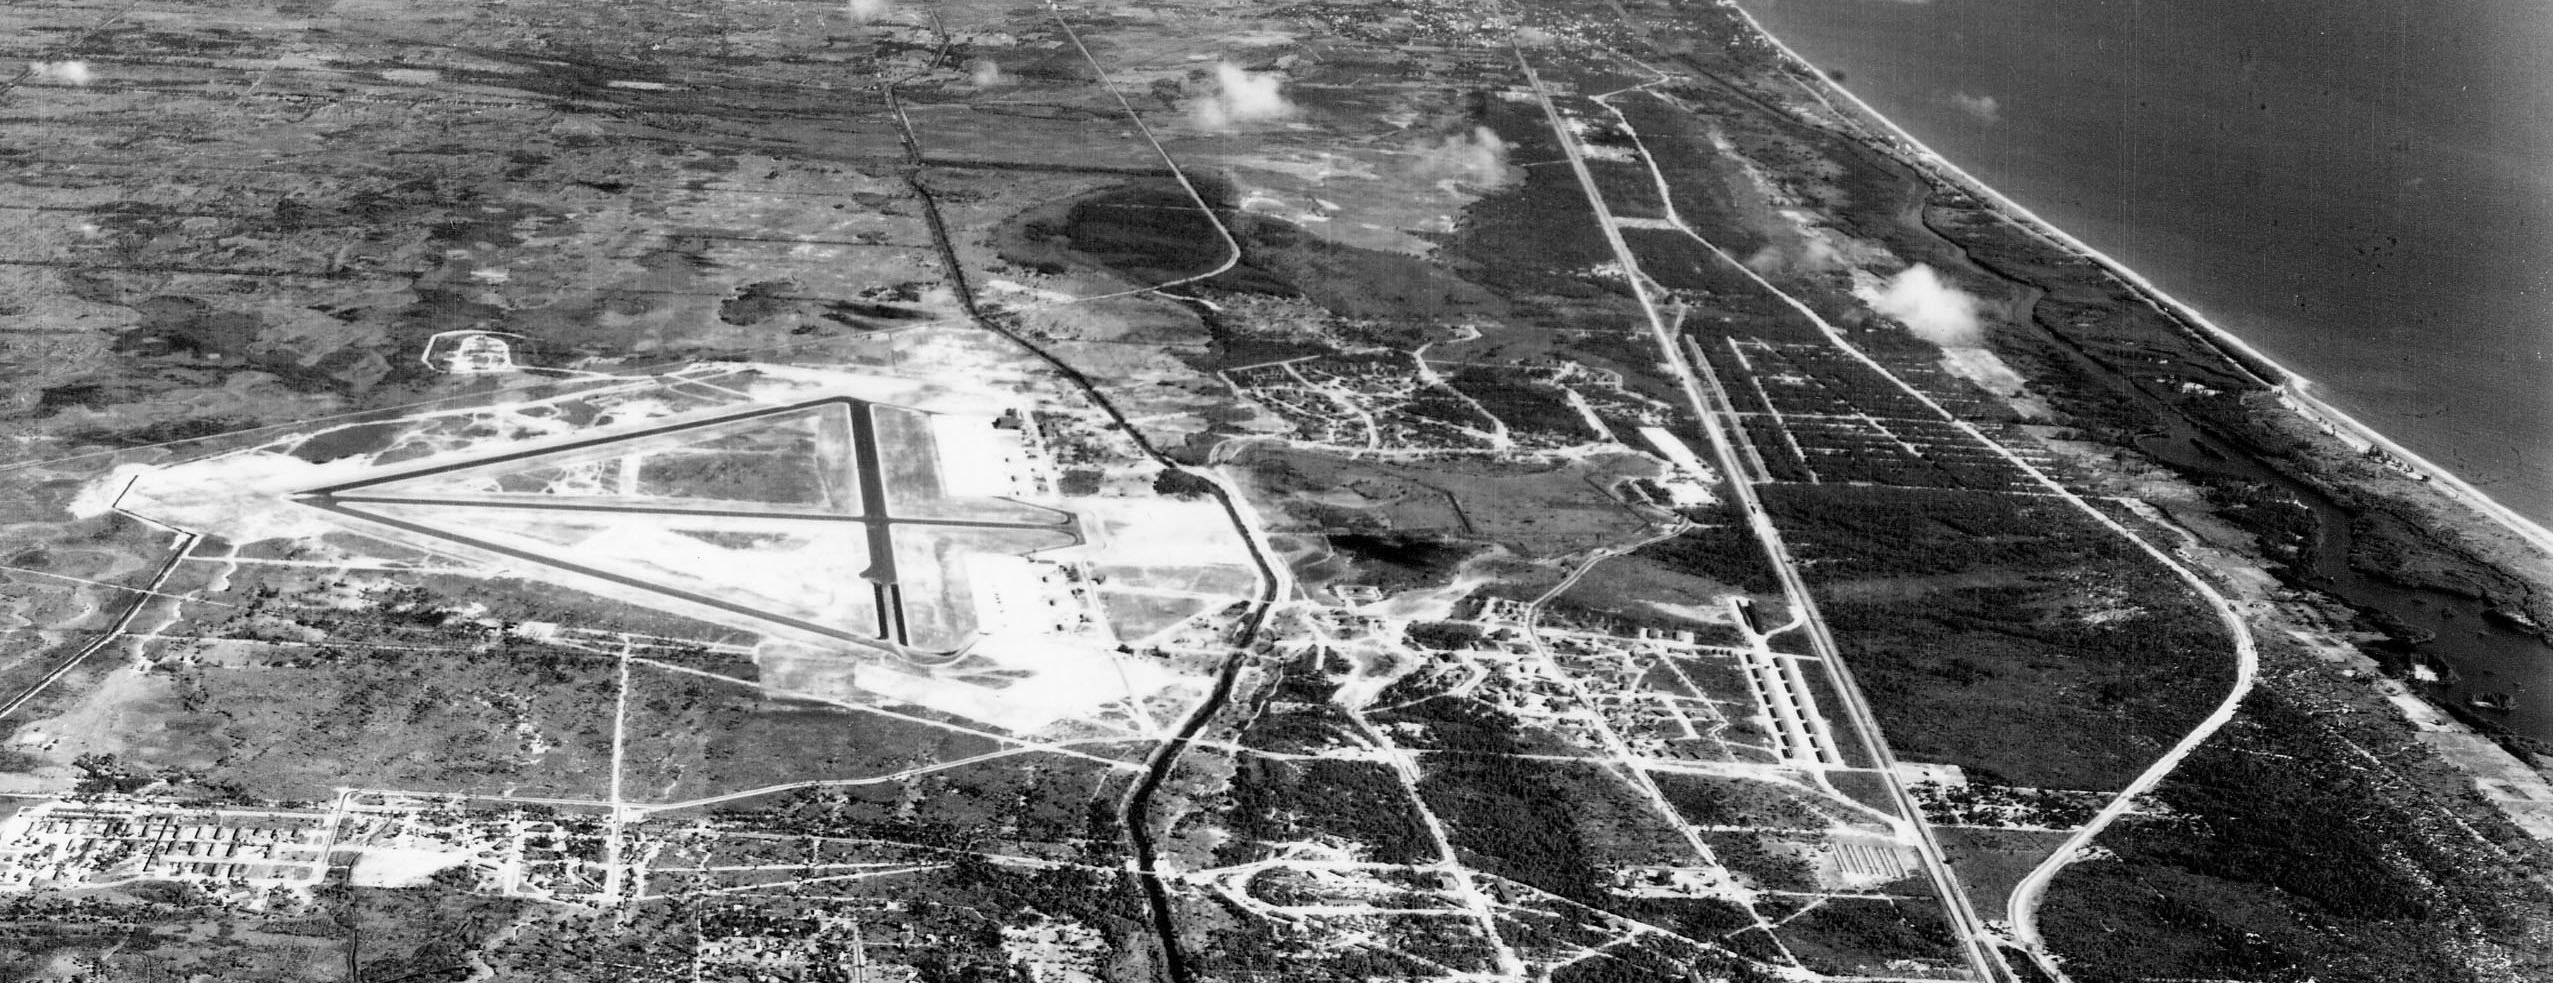 Boca Raton's Little-Known Role in Securing WWII Victory